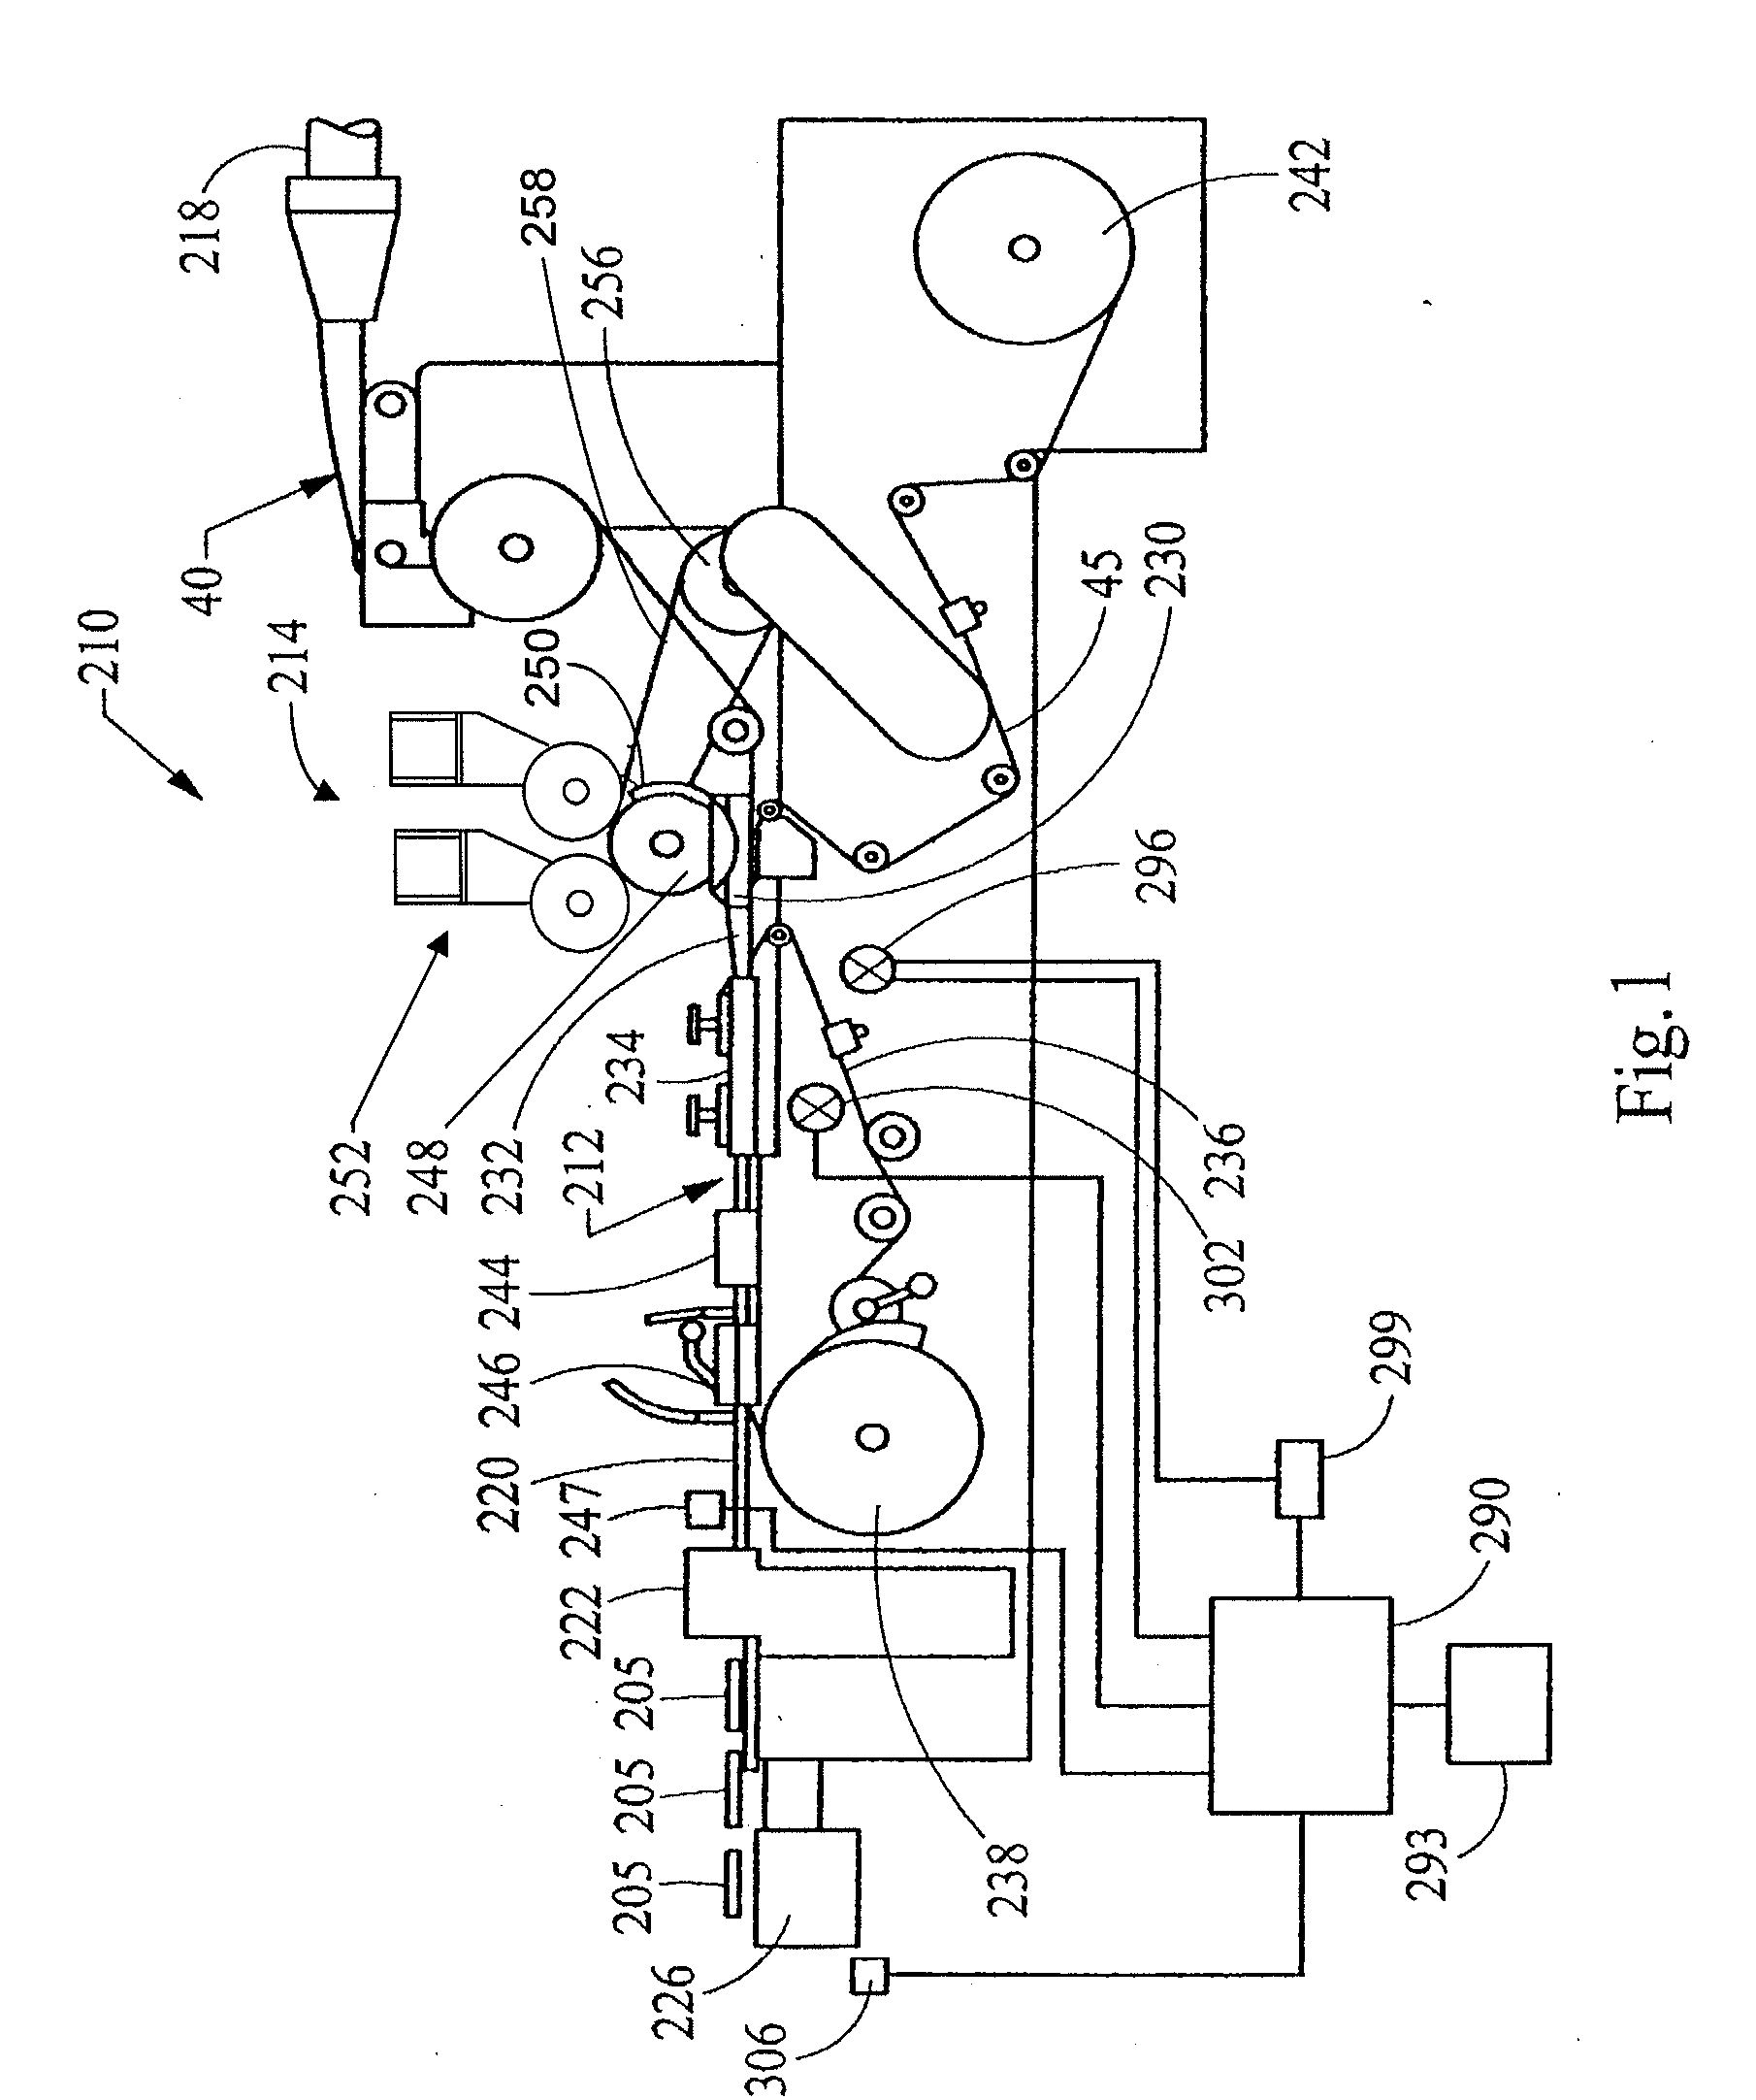 Apparatus for inserting objects into a filter component of a smoking article, and associated method